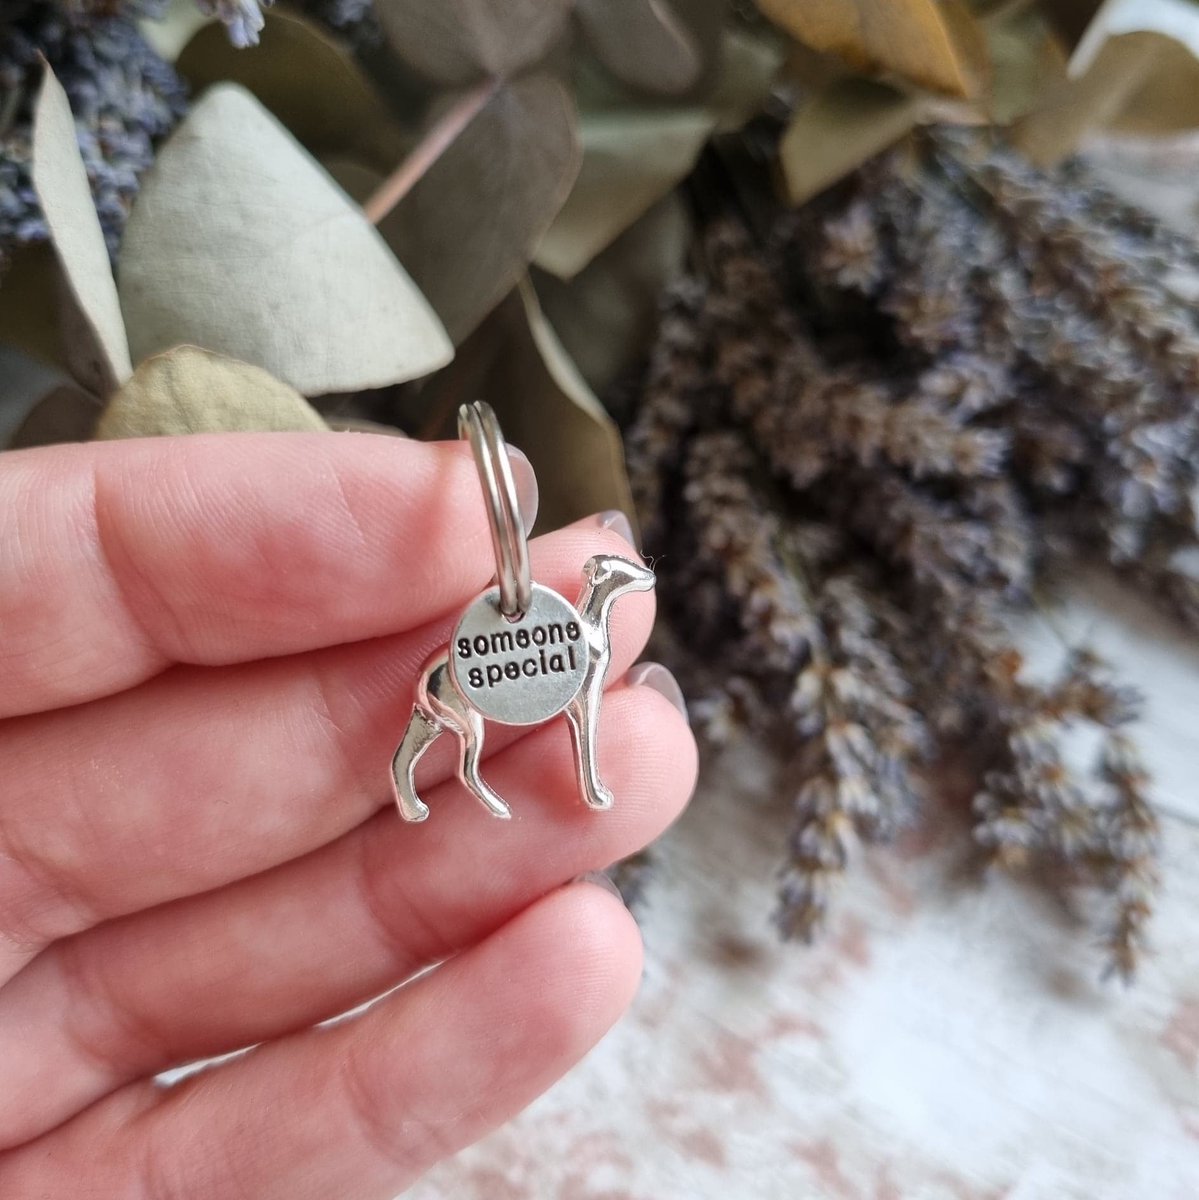 #whippet dog #Greyhounds someone special charm for your lanyard - key fob - zip - journal - bag etsy.me/3V5G1QW via @Etsy #EarlyBiz #MHHSBD #DogsofTwittter #dog #UKMakers